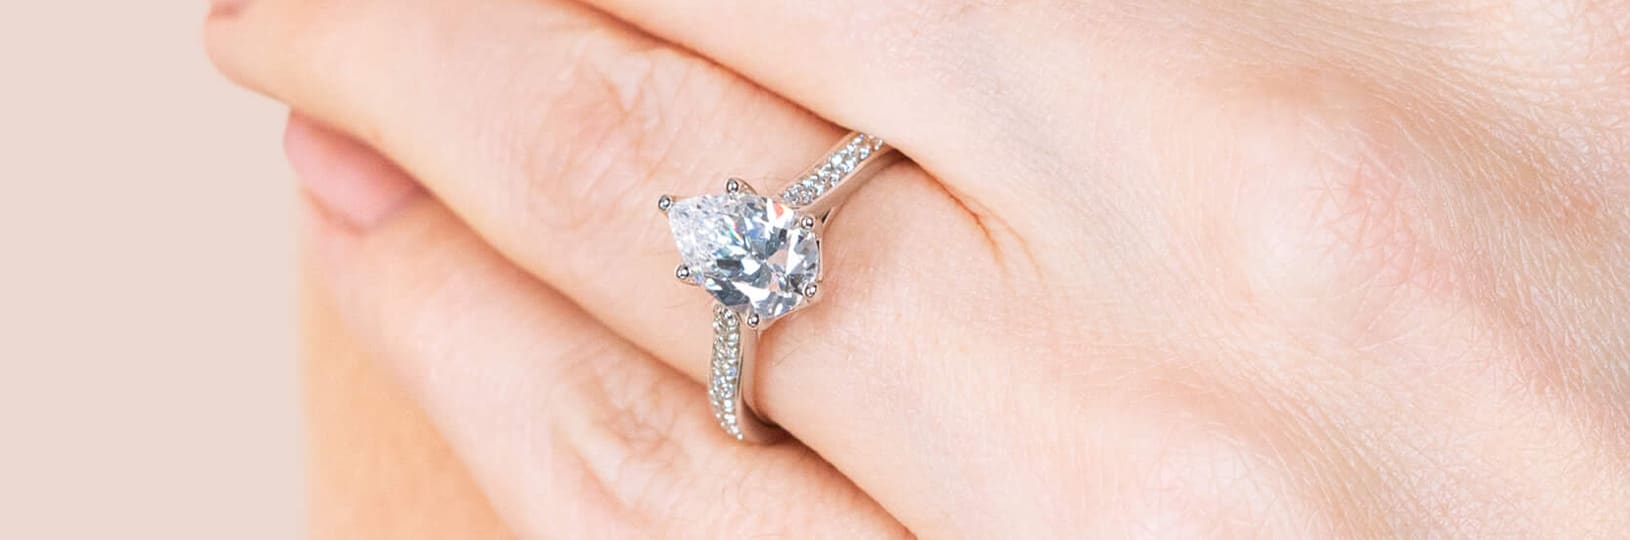 Accented engagement ring